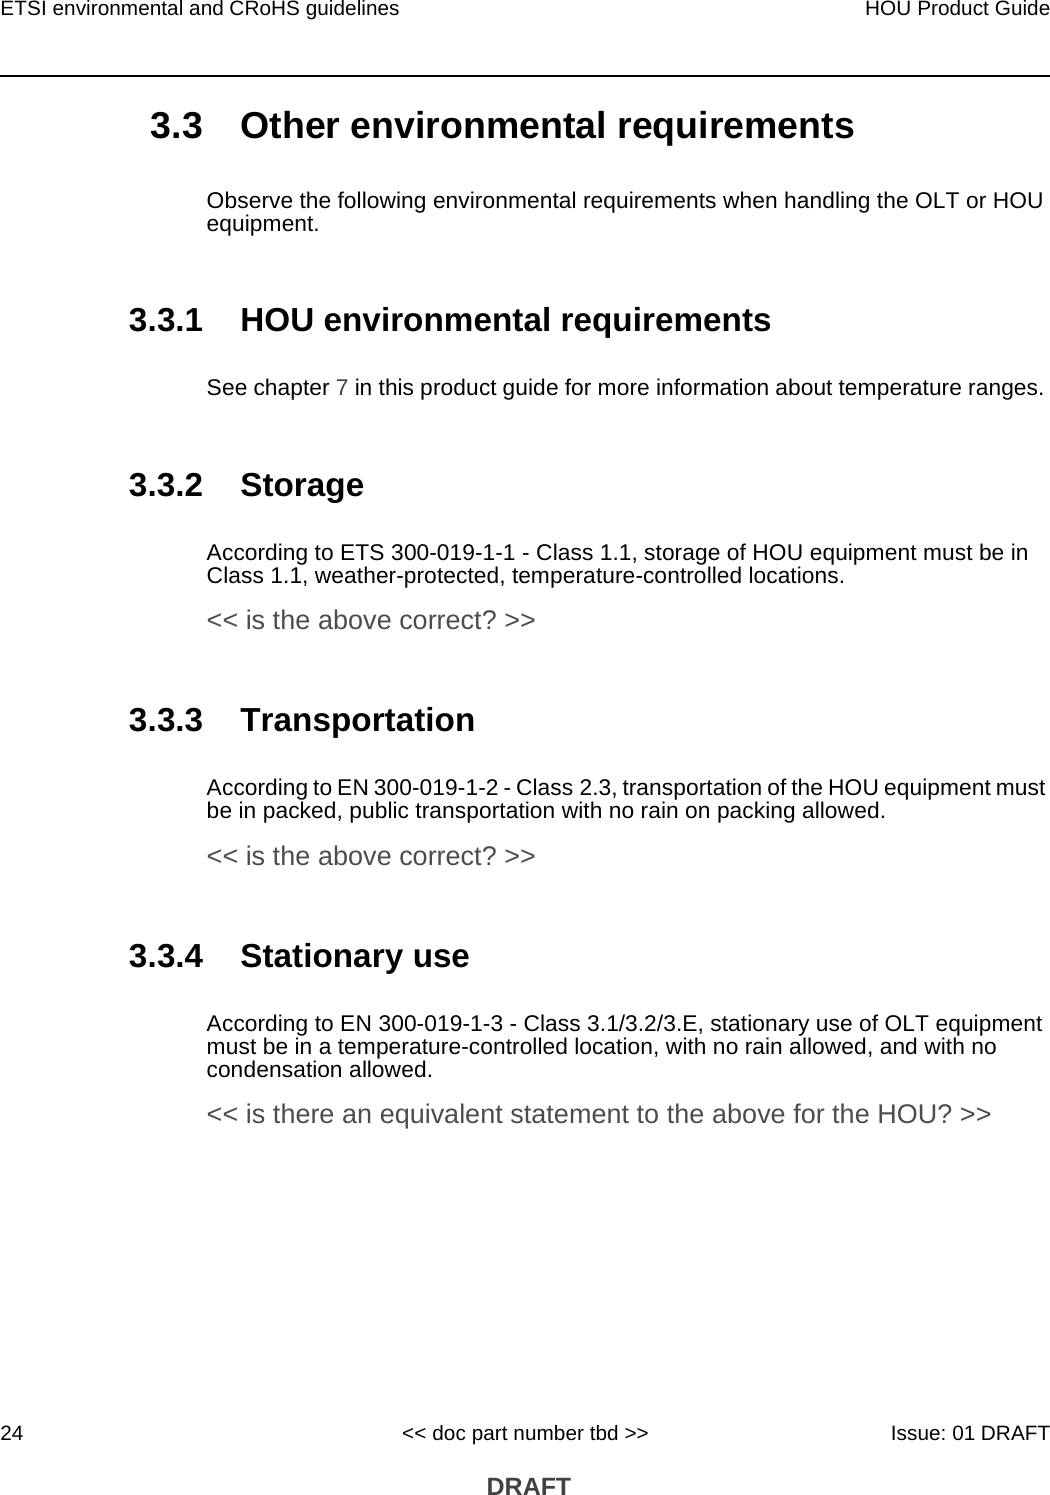 ETSI environmental and CRoHS guidelines24HOU Product Guide&lt;&lt; doc part number tbd &gt;&gt; Issue: 01 DRAFT DRAFT3.3 Other environmental requirementsObserve the following environmental requirements when handling the OLT or HOU equipment.3.3.1 HOU environmental requirementsSee chapter 7 in this product guide for more information about temperature ranges. 3.3.2 StorageAccording to ETS 300-019-1-1 - Class 1.1, storage of HOU equipment must be in Class 1.1, weather-protected, temperature-controlled locations. &lt;&lt; is the above correct? &gt;&gt;3.3.3 TransportationAccording to EN 300-019-1-2 - Class 2.3, transportation of the HOU equipment must be in packed, public transportation with no rain on packing allowed.&lt;&lt; is the above correct? &gt;&gt;3.3.4 Stationary useAccording to EN 300-019-1-3 - Class 3.1/3.2/3.E, stationary use of OLT equipment must be in a temperature-controlled location, with no rain allowed, and with no condensation allowed. &lt;&lt; is there an equivalent statement to the above for the HOU? &gt;&gt;